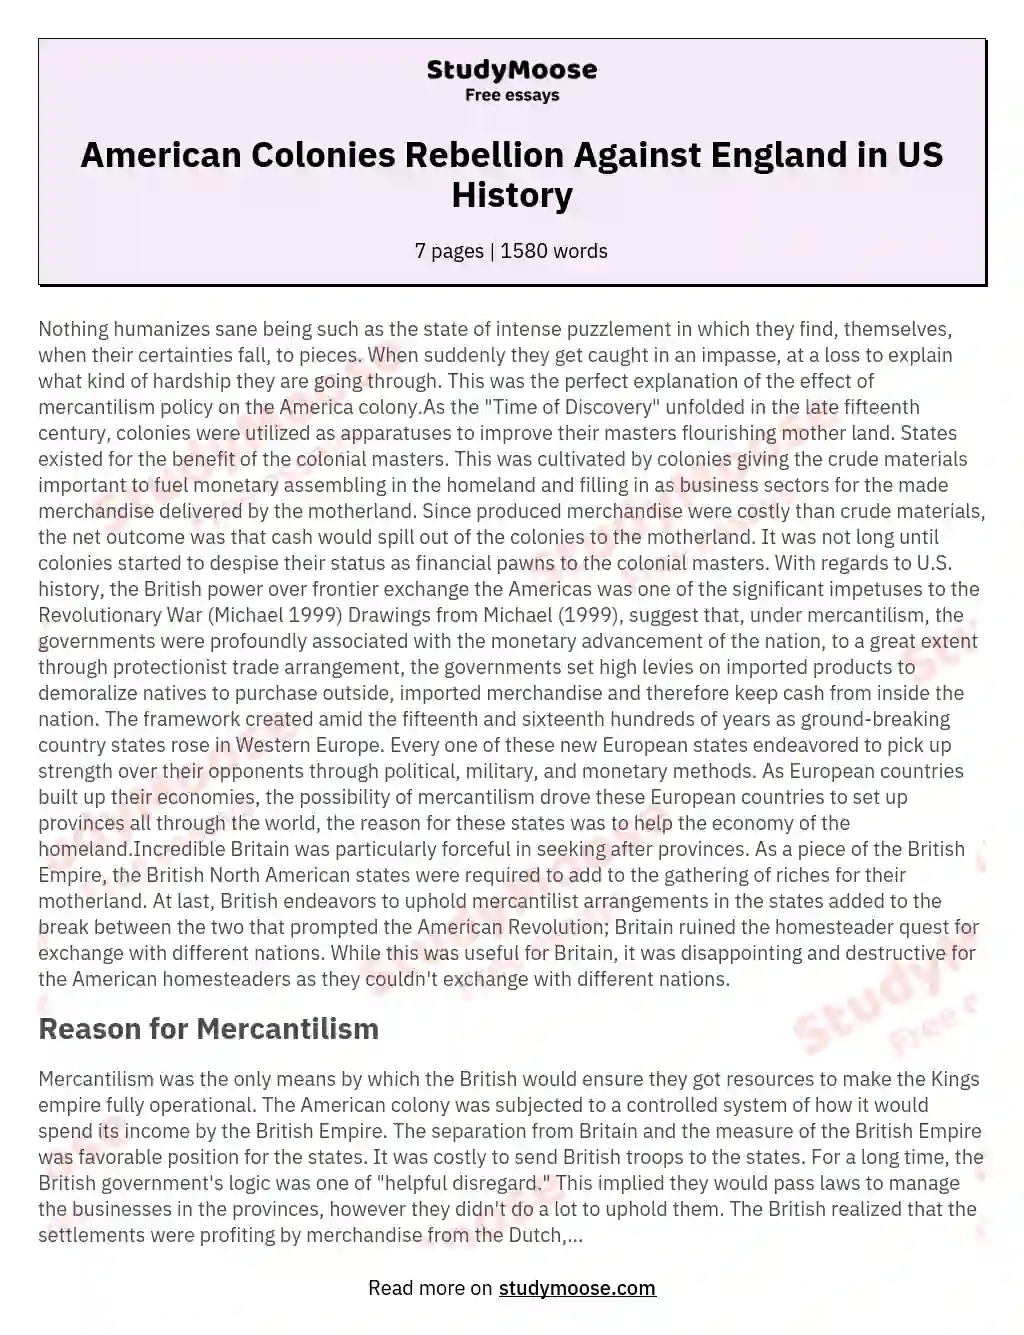 American Colonies Rebellion Against England in US History essay